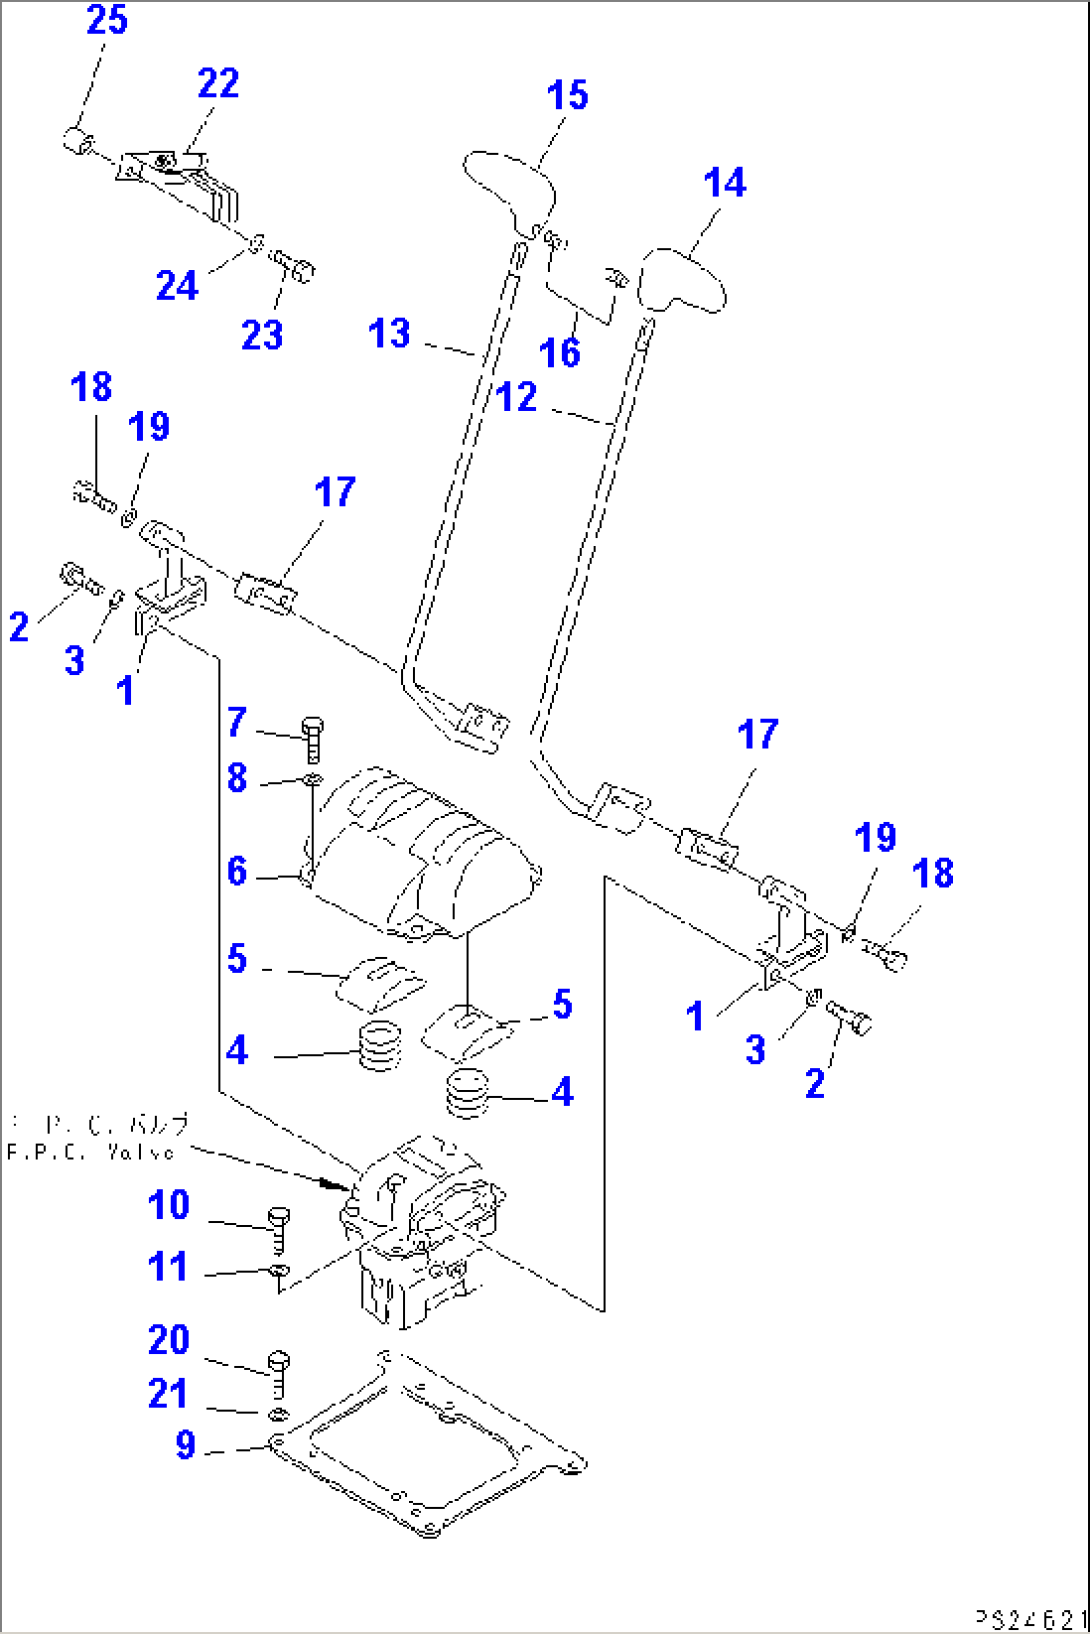 TRAVEL CONTROL LEVER AND LINKAGE(#1045-1100)